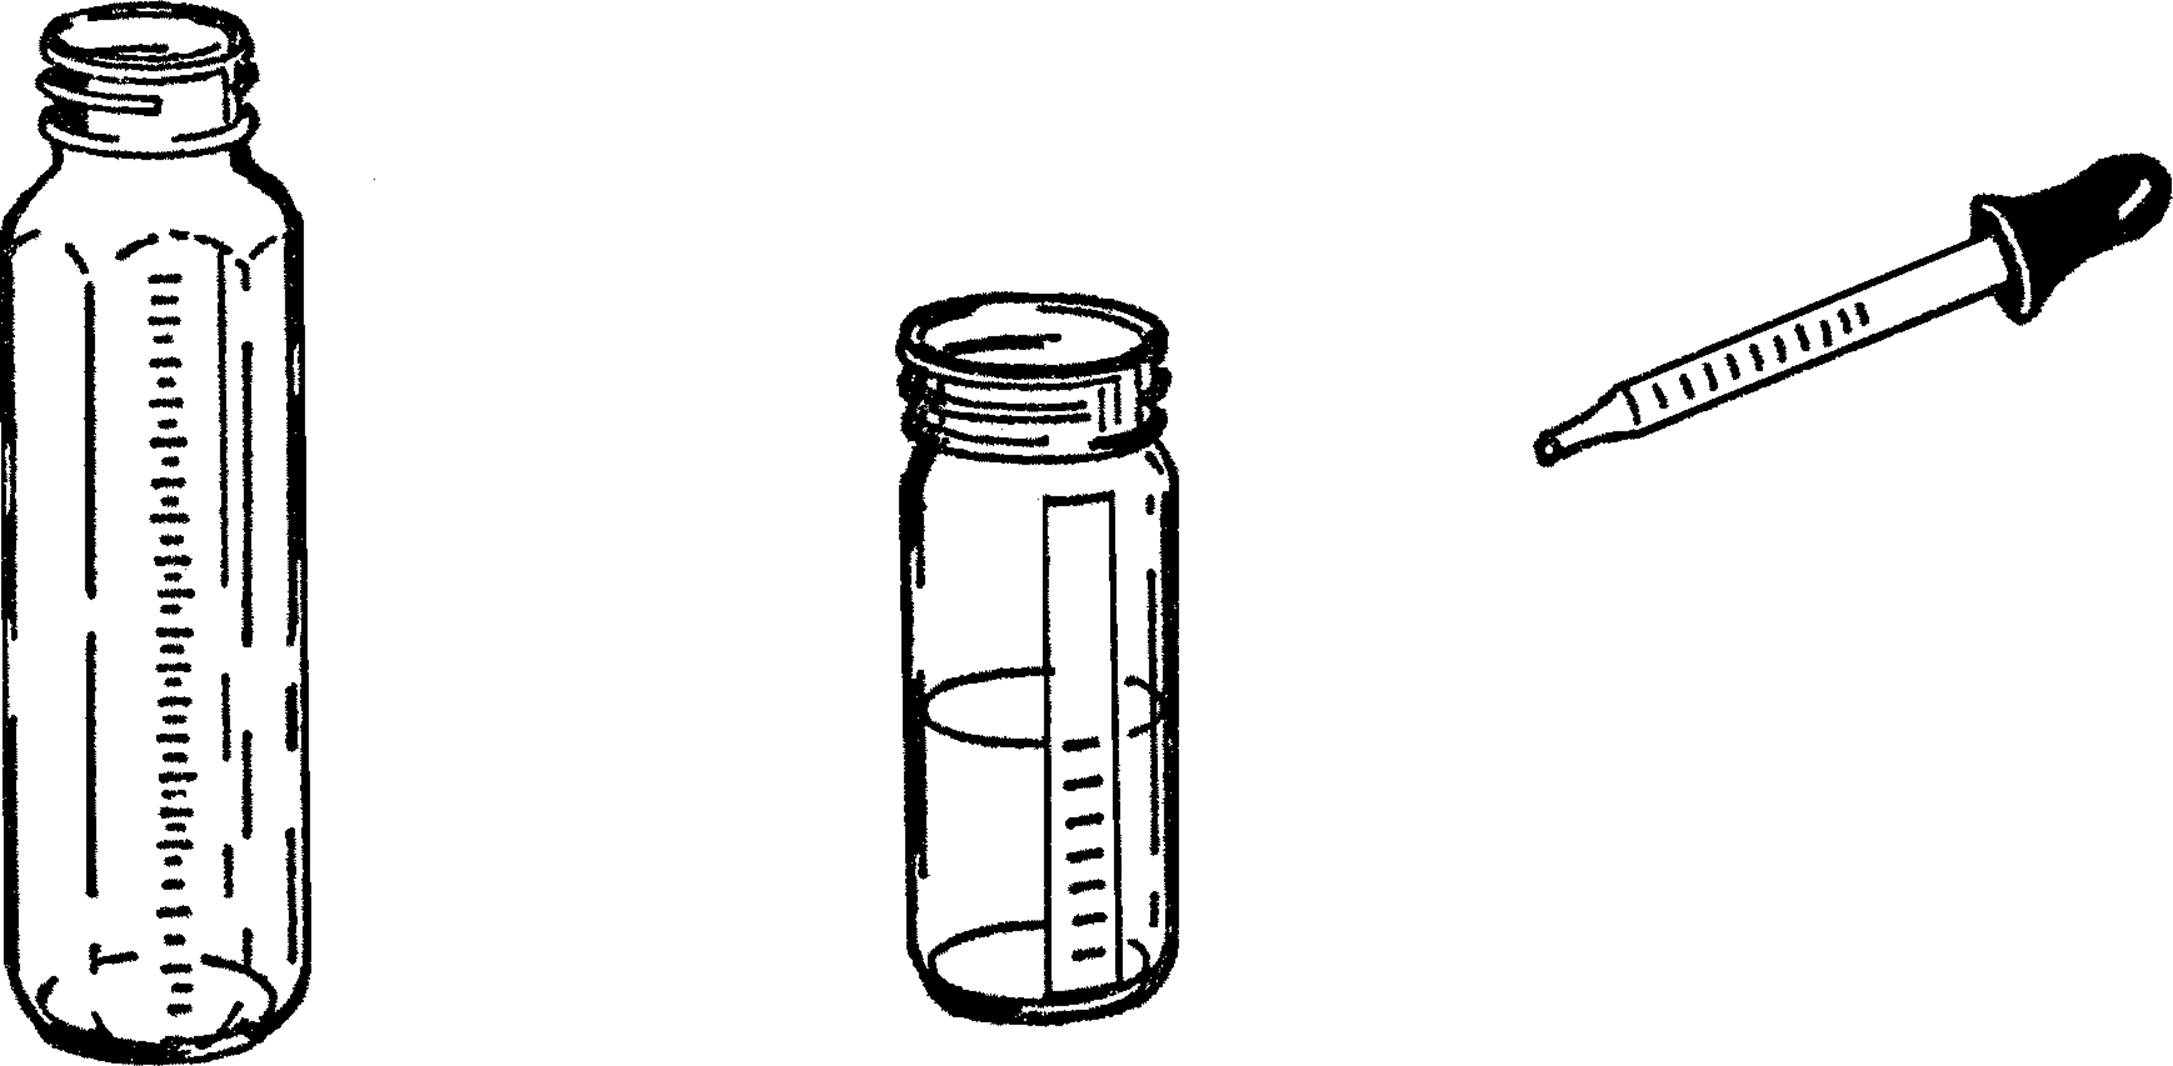 Graduated cylinder and flask.